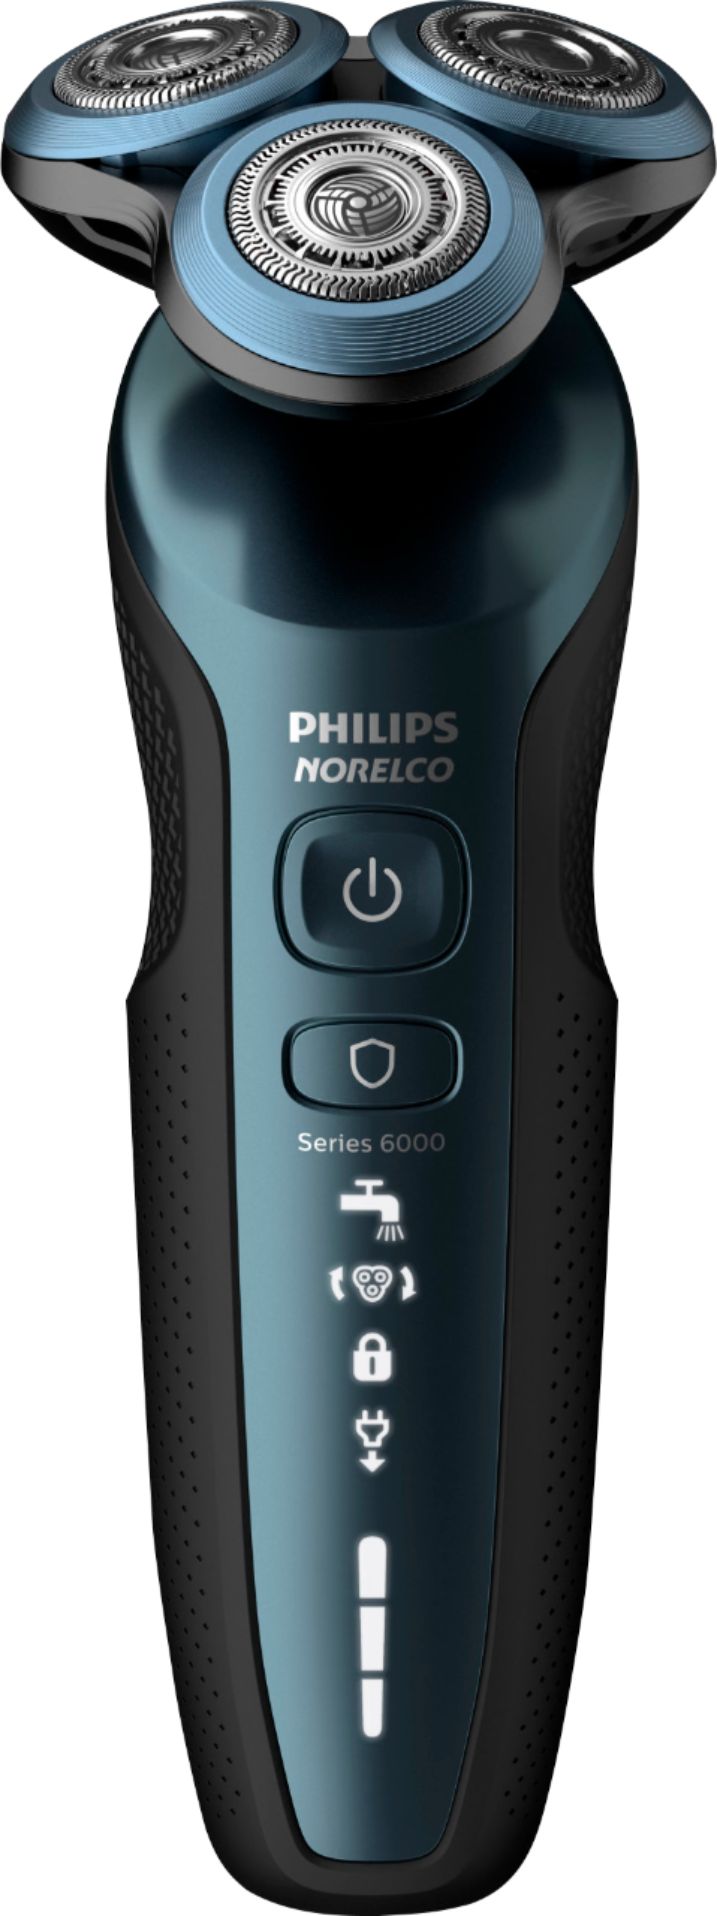 Left View: Philips Norelco - 6900 Wet/Dry Electric Shaver - Savio Blue